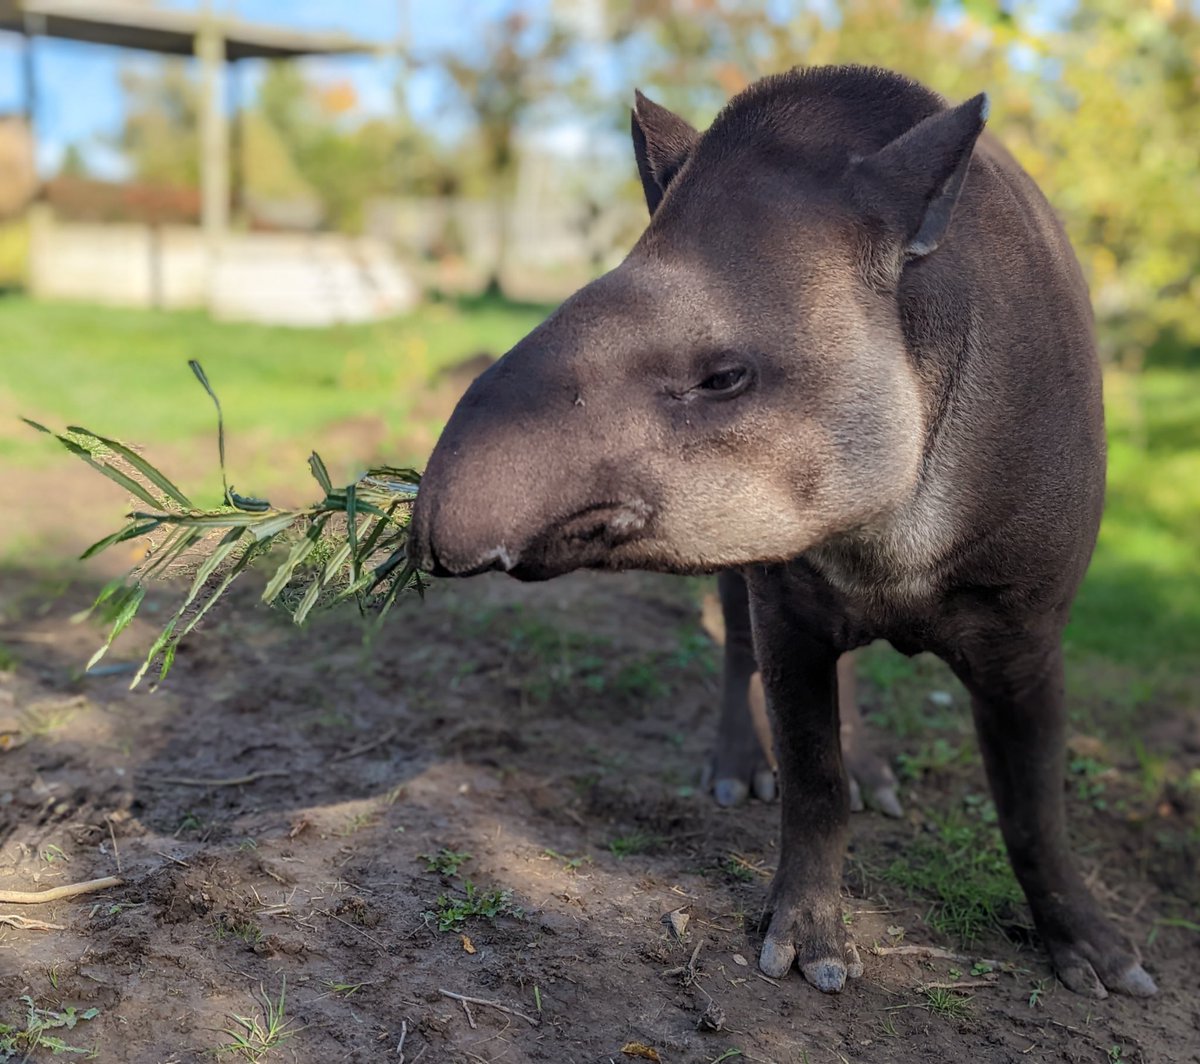 Here’s a pic of our Lowland #Tapir Cecil looking chilled for your #thursdayvibes 
Book an experience with him to get #upclose and make #memories with us! 📞 01754 820107

@visitlincoln @LincsConnect @LincsOutAbout #LincsConnect #experience #lincswildlifepark #skegness #Boston